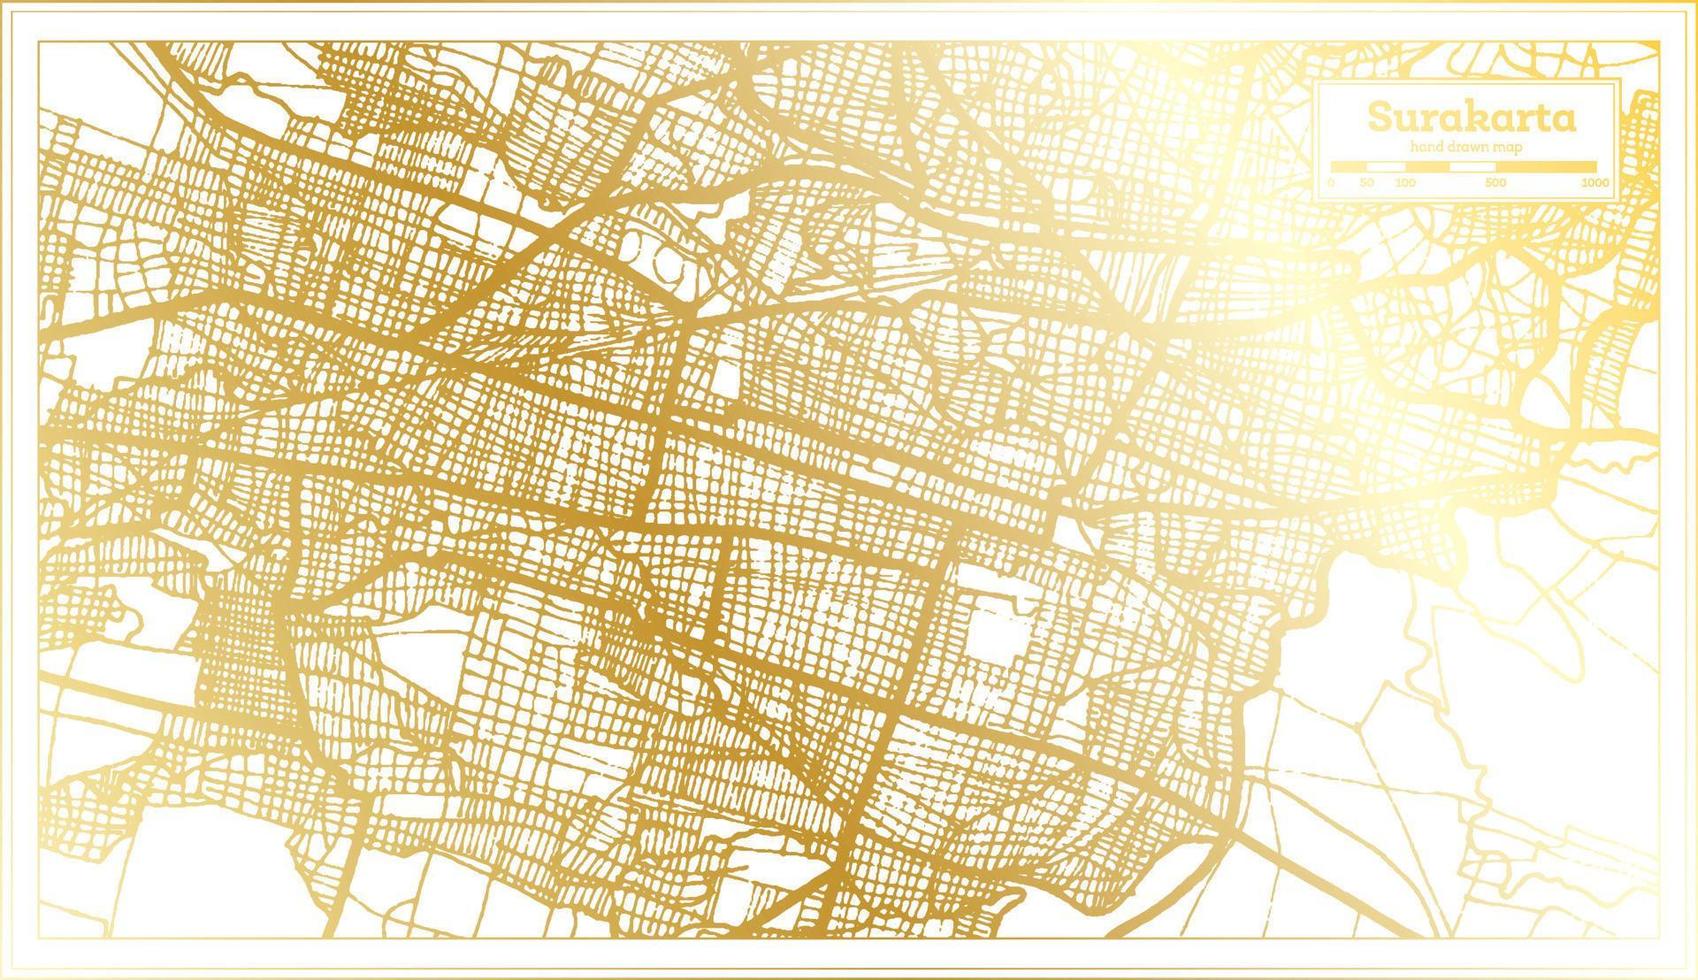 Surakarta Indonesia City Map in Retro Style in Golden Color. Outline Map. vector